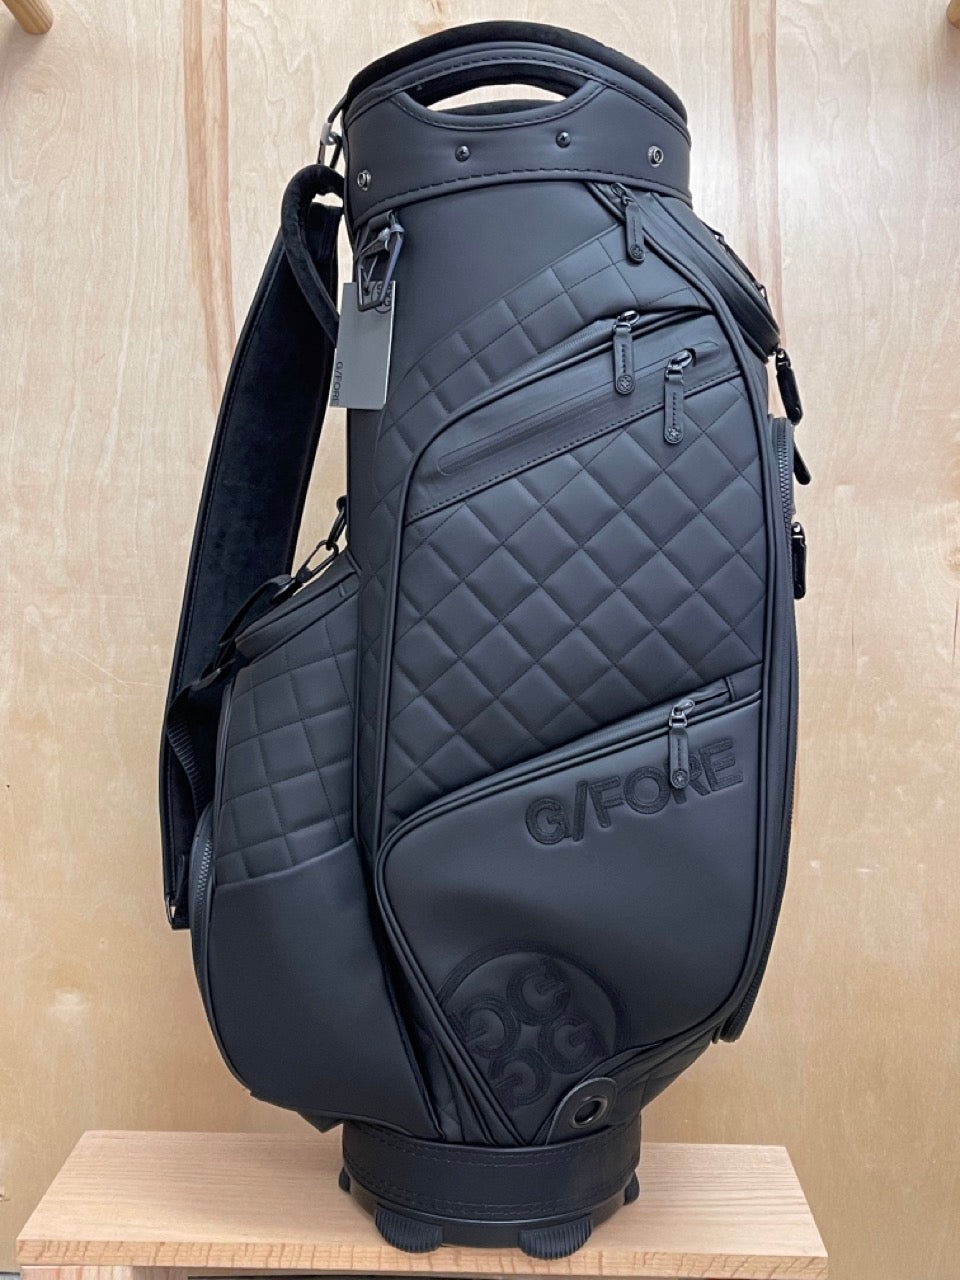 GFORE MID SIZE STAFF BAG